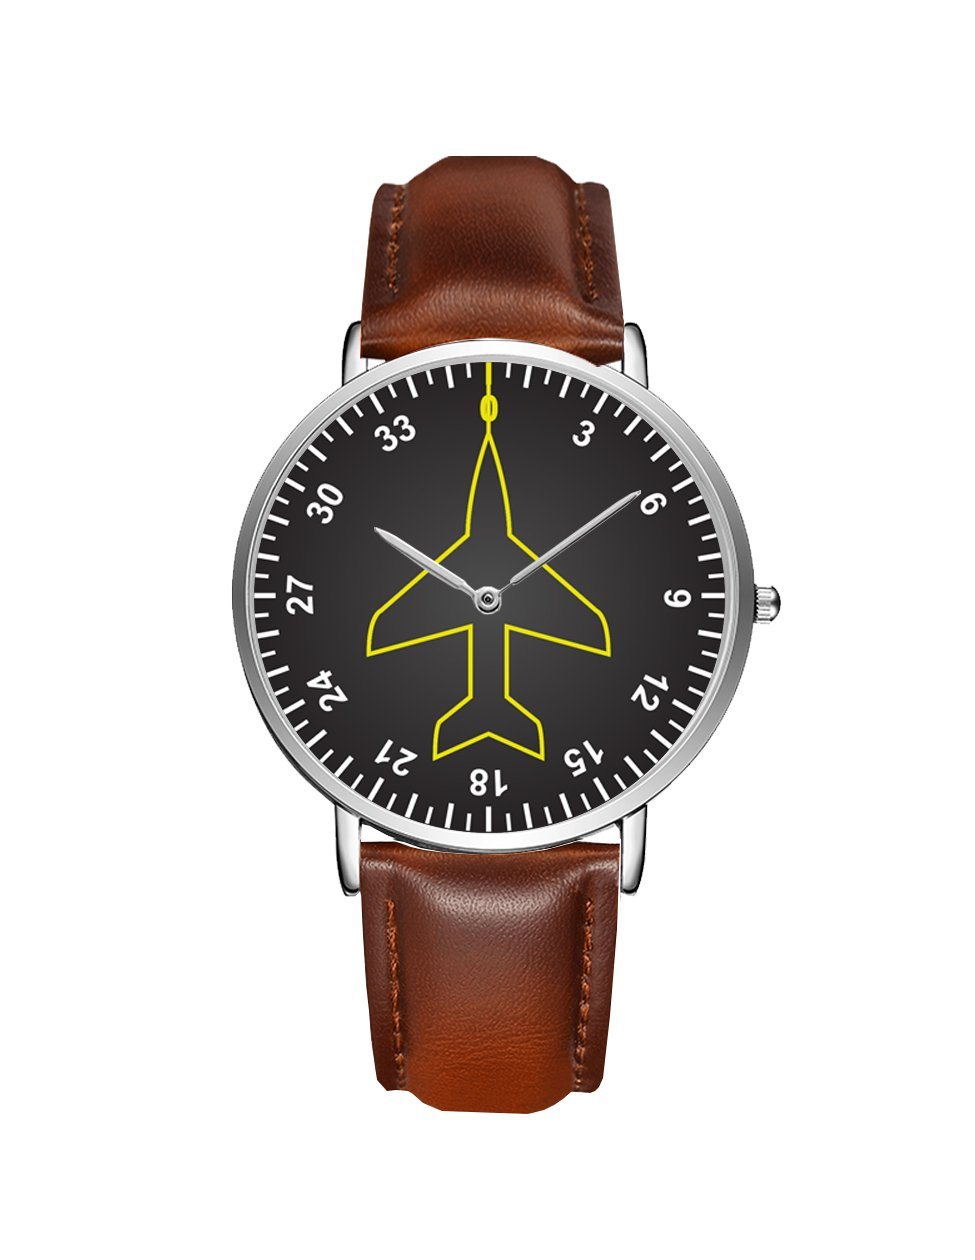 Airplane Instrument Series (Heading) Leather Strap Watches Pilot Eyes Store Silver & Brown Leather Strap 